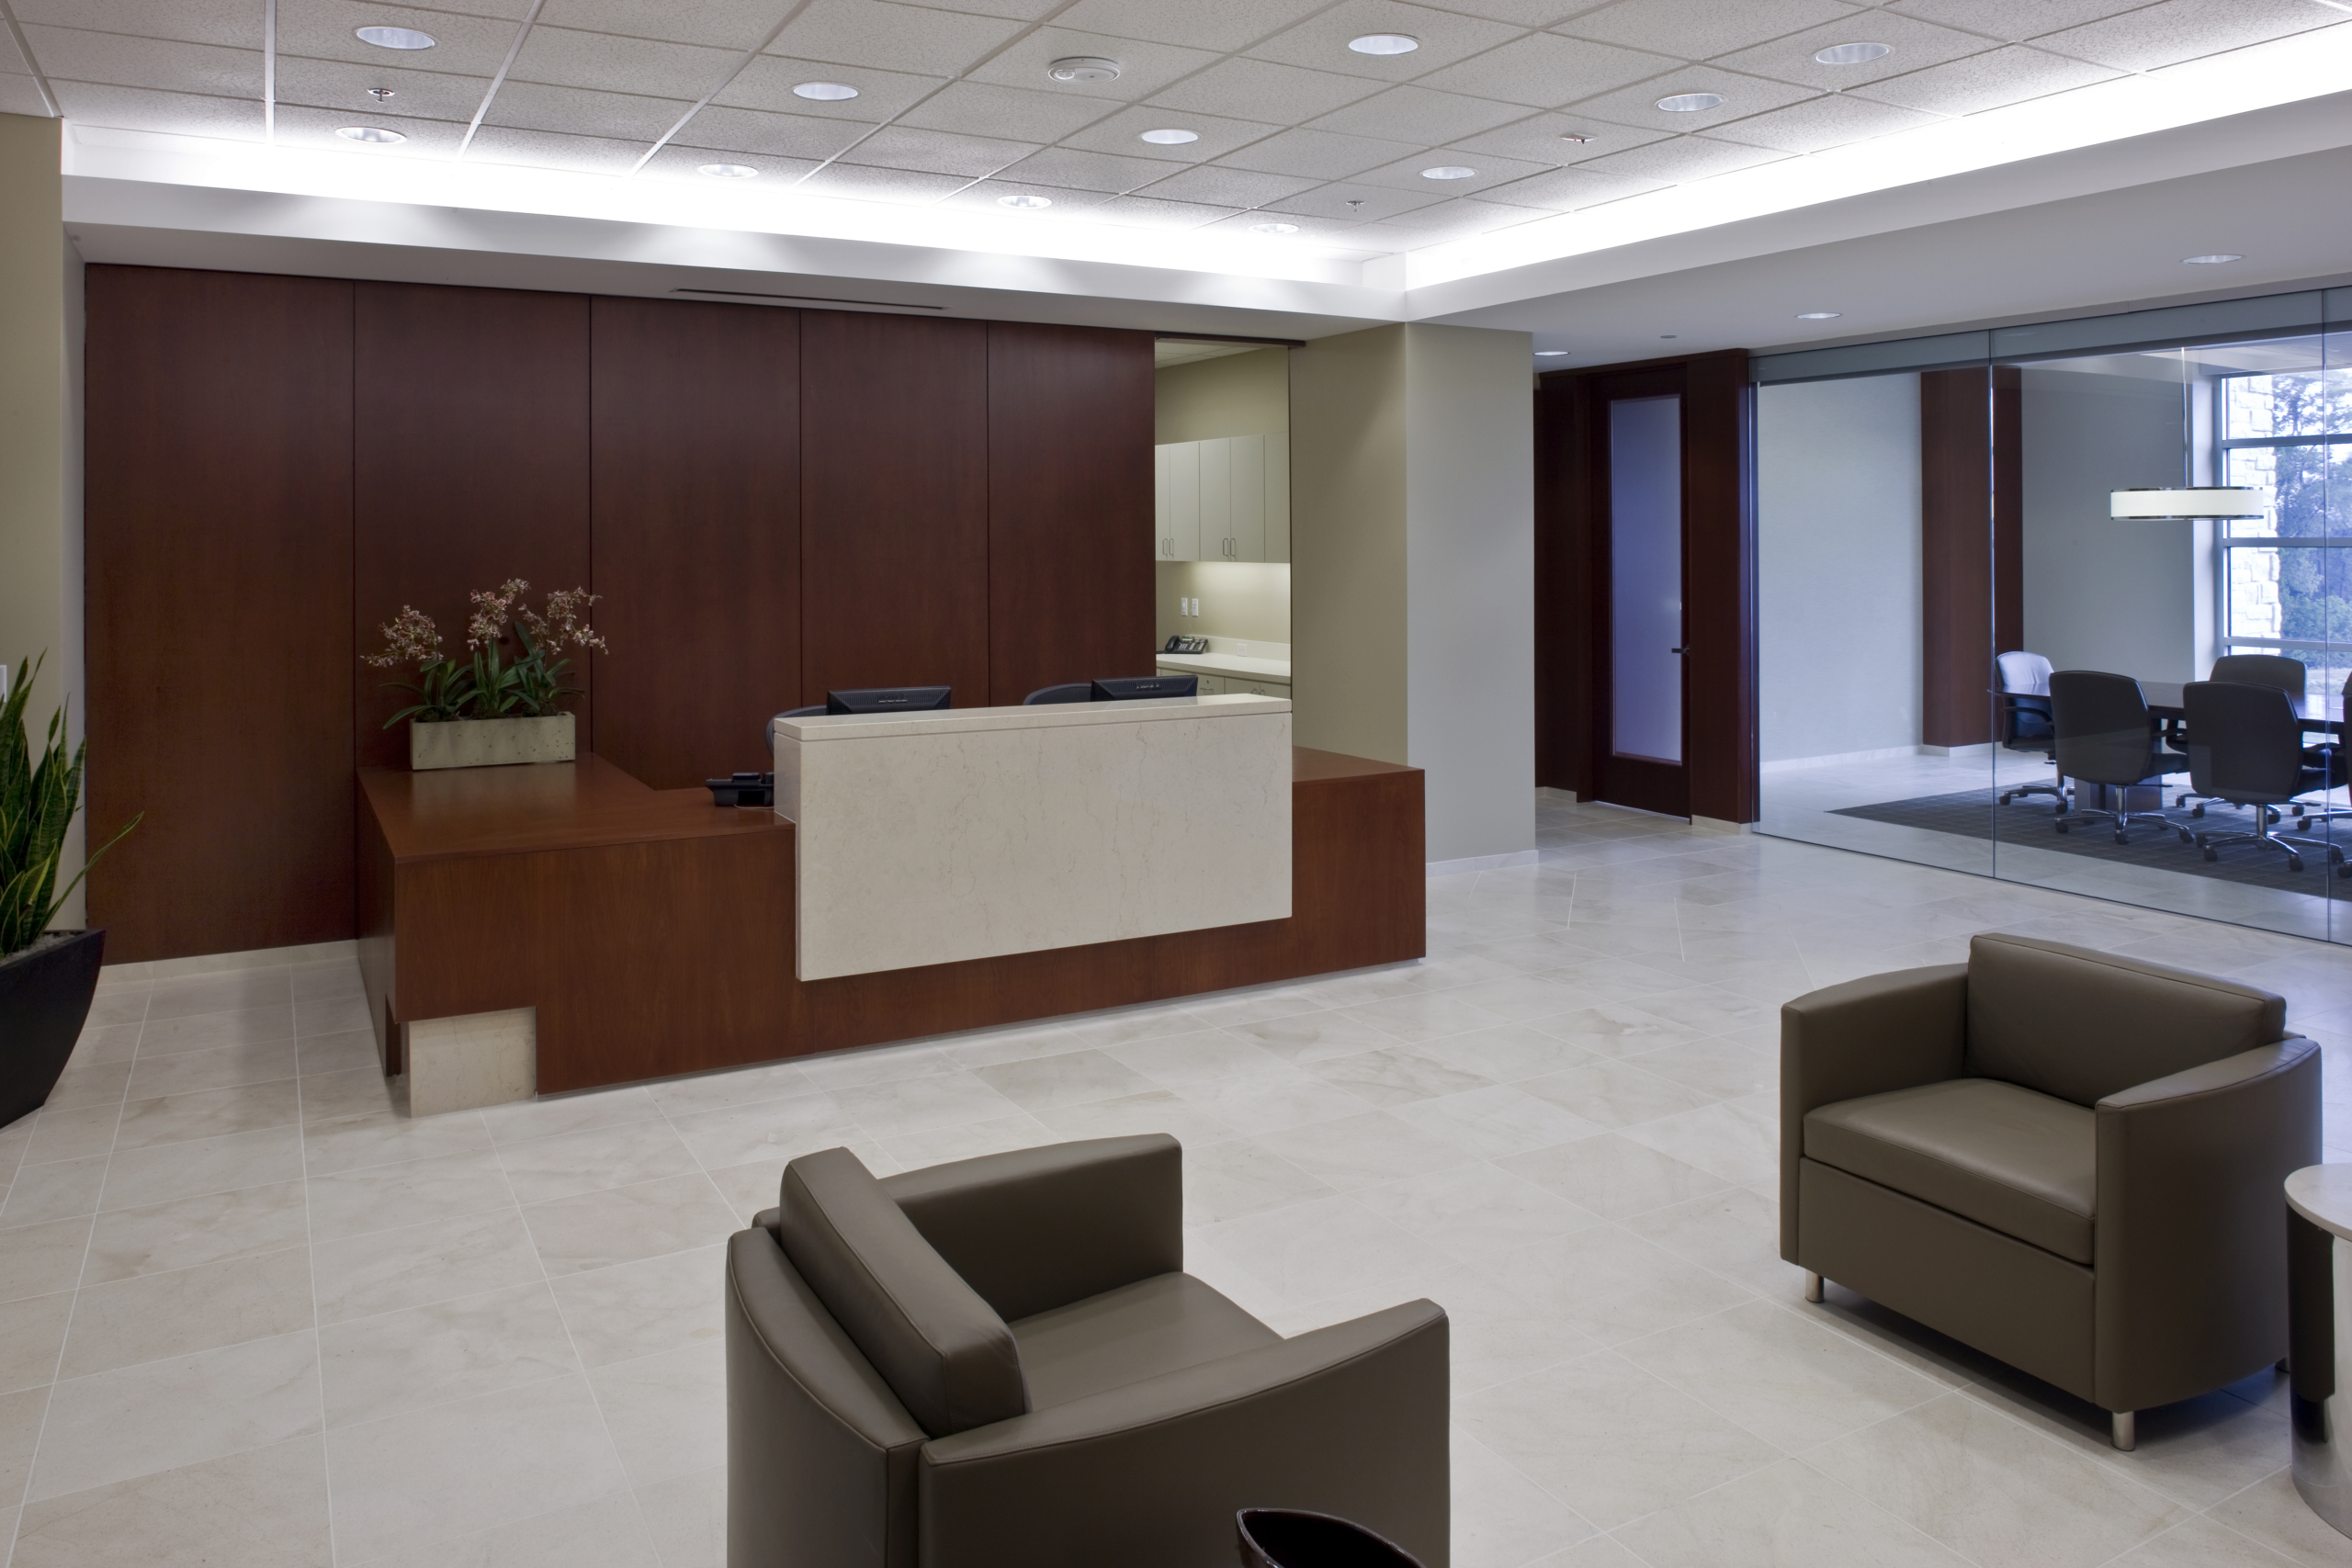 Modern reception area with a wooden desk and two beige chairs. Room features a light marble floor and recessed lighting. A conference room with a glass wall is visible in the background.